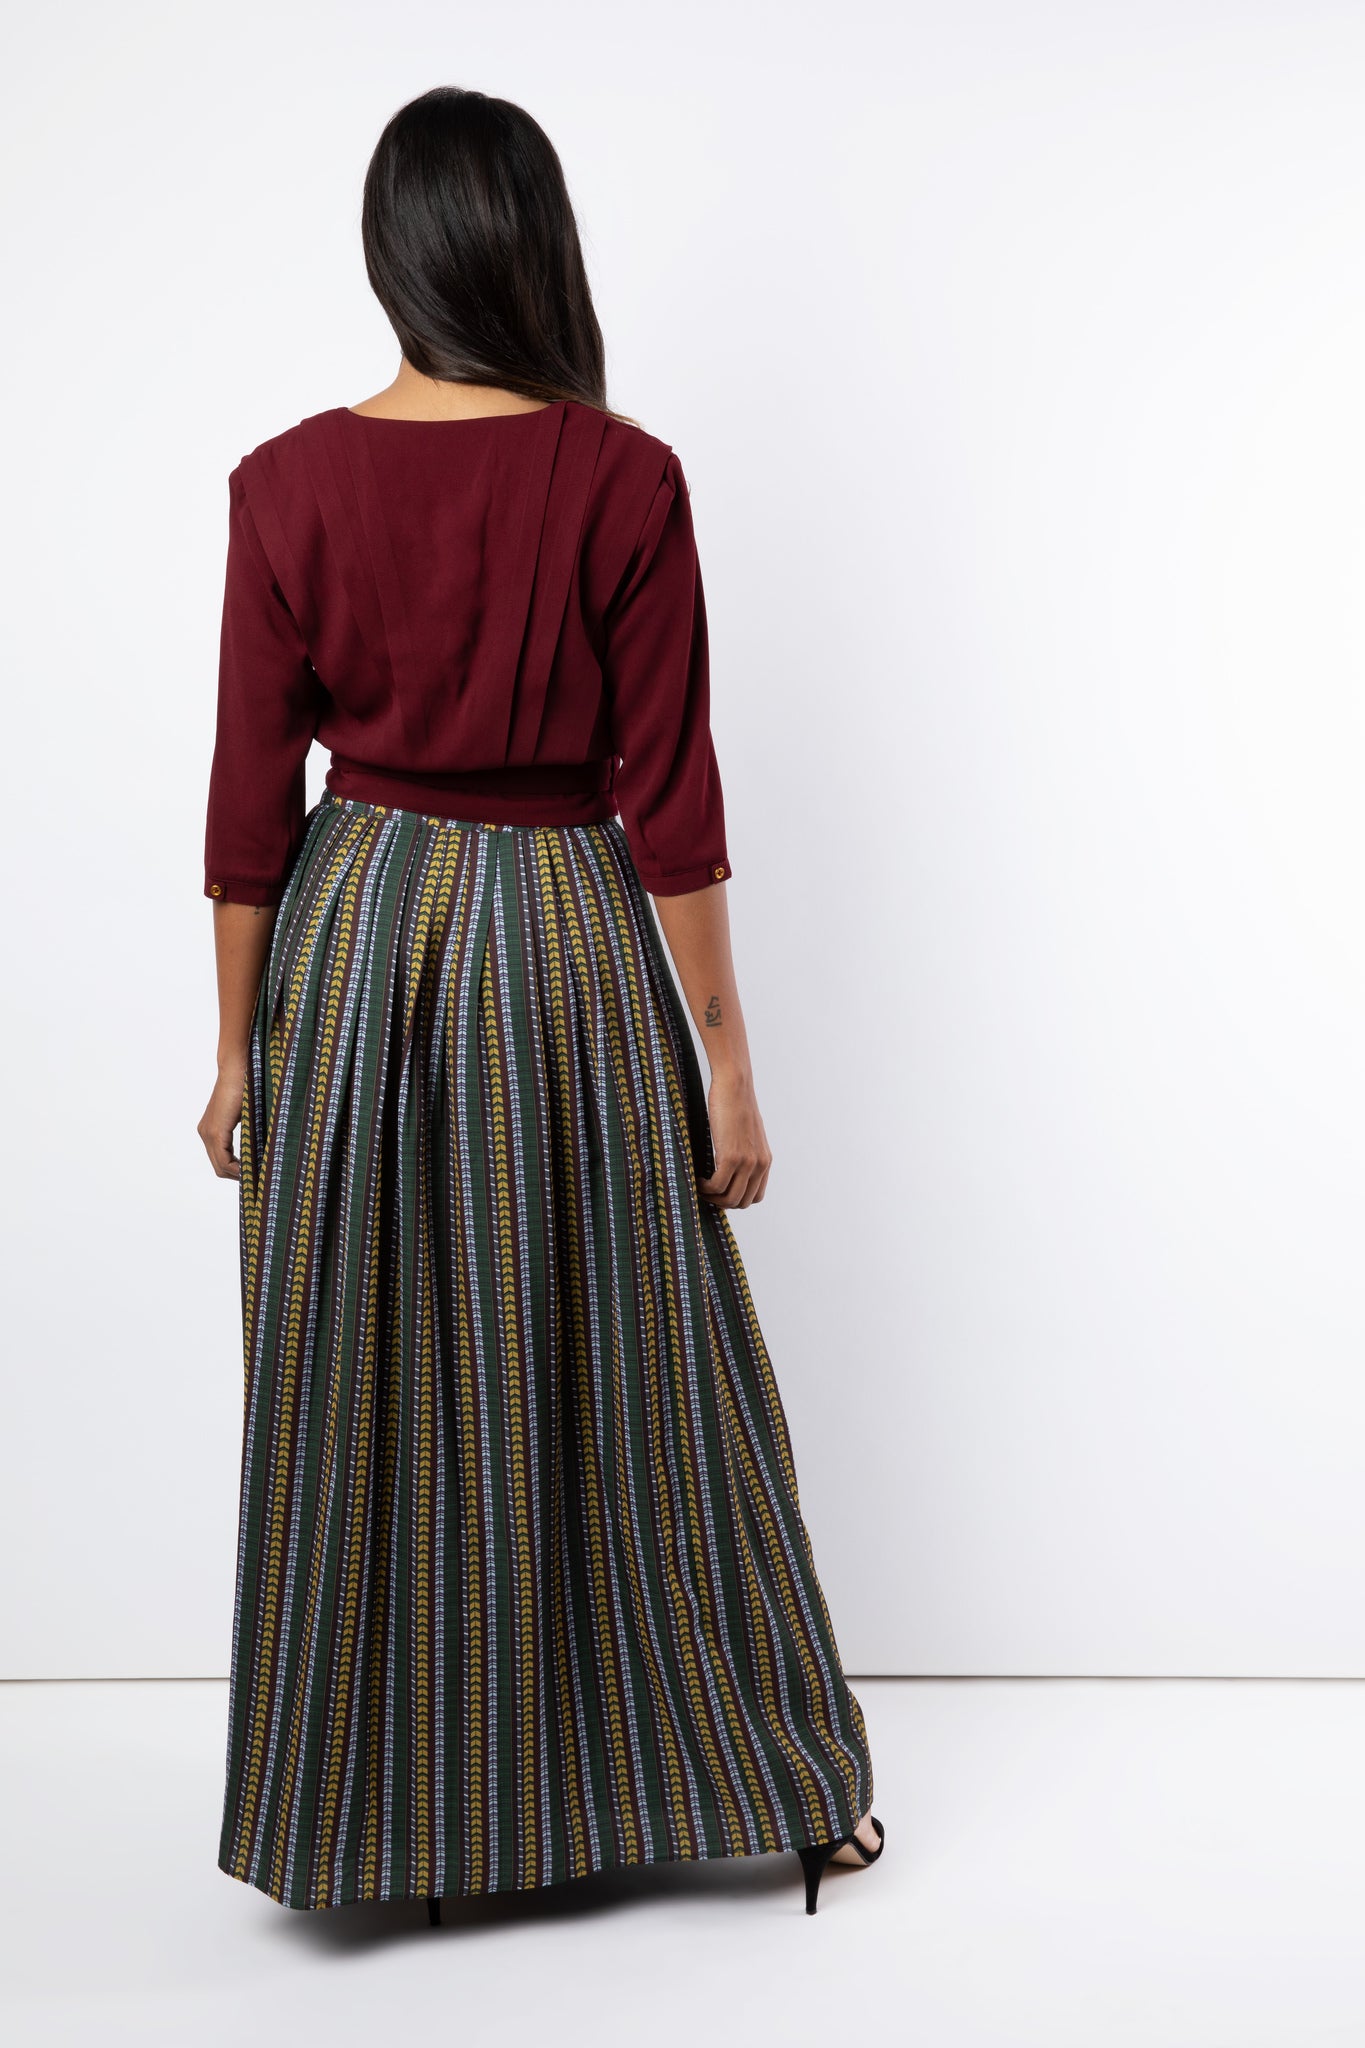 Back view of pleated maroon shirt with printed maxi skirt